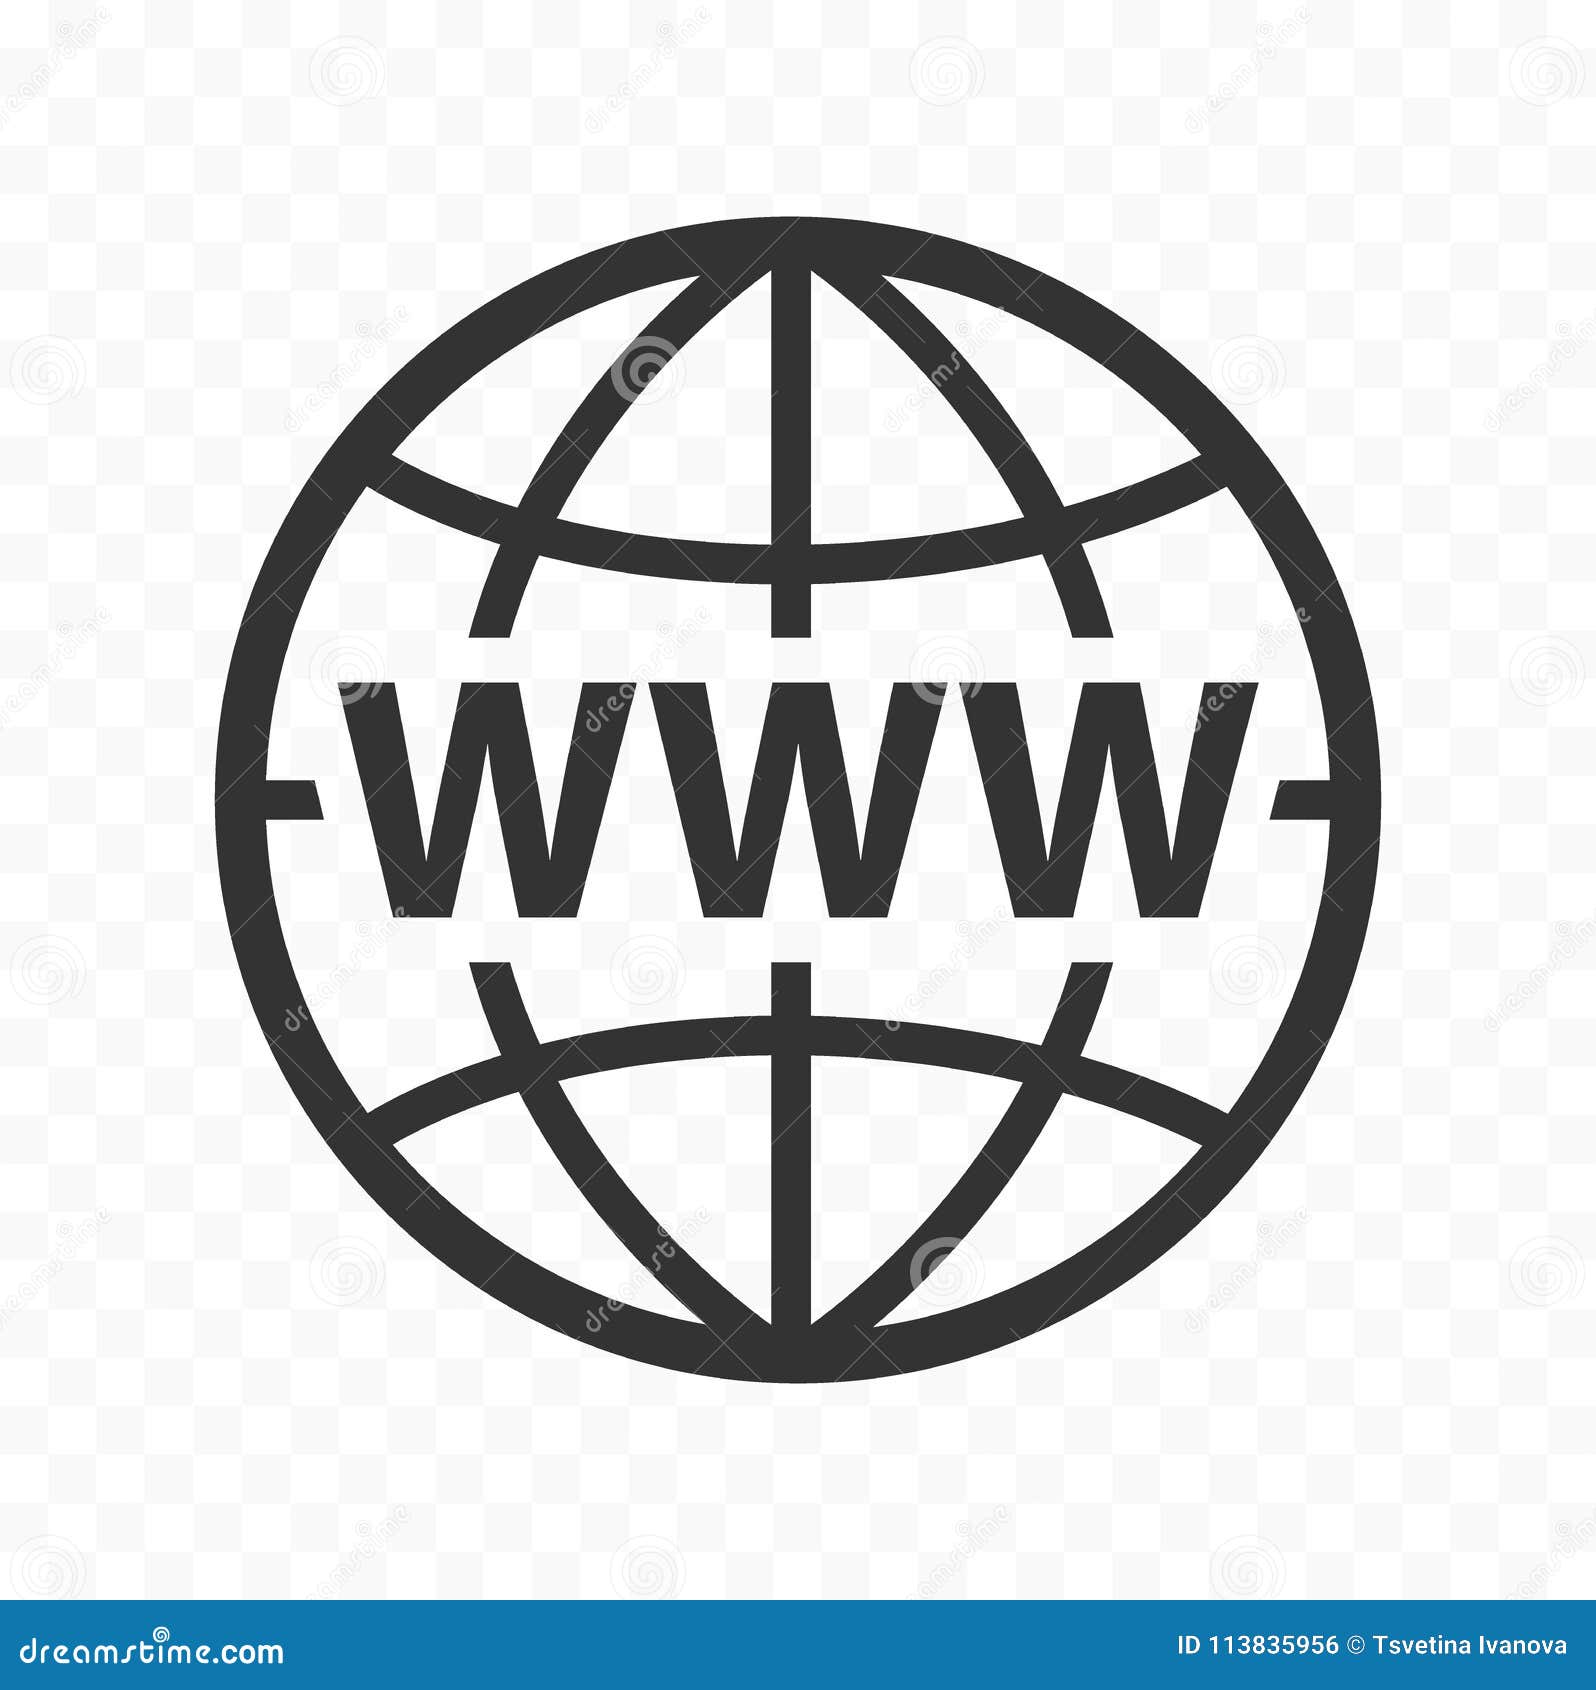 globe web  icon set with www sign. planet icon with world wide web sign.